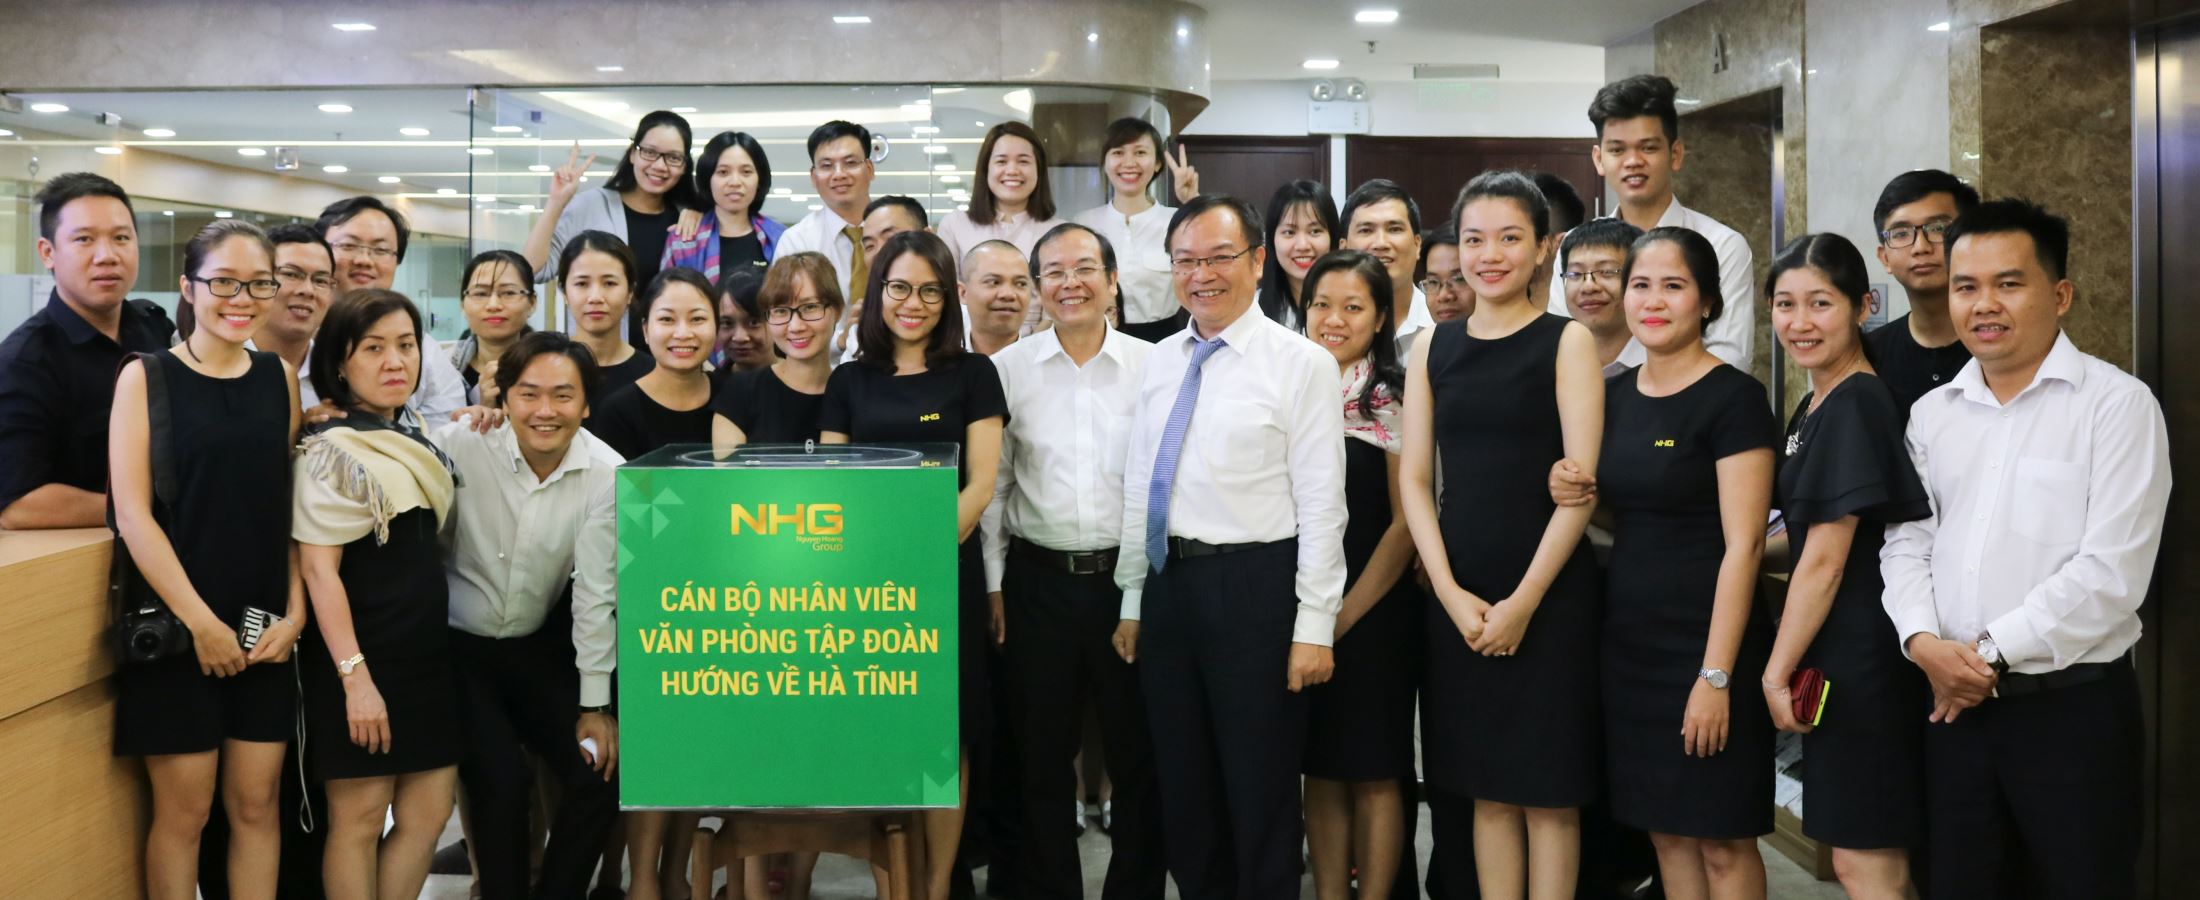 NHG staffs donated to help hurricane victims in Ha Tinh province, spreading the human spirit and appreciating the human values ​​of the Group